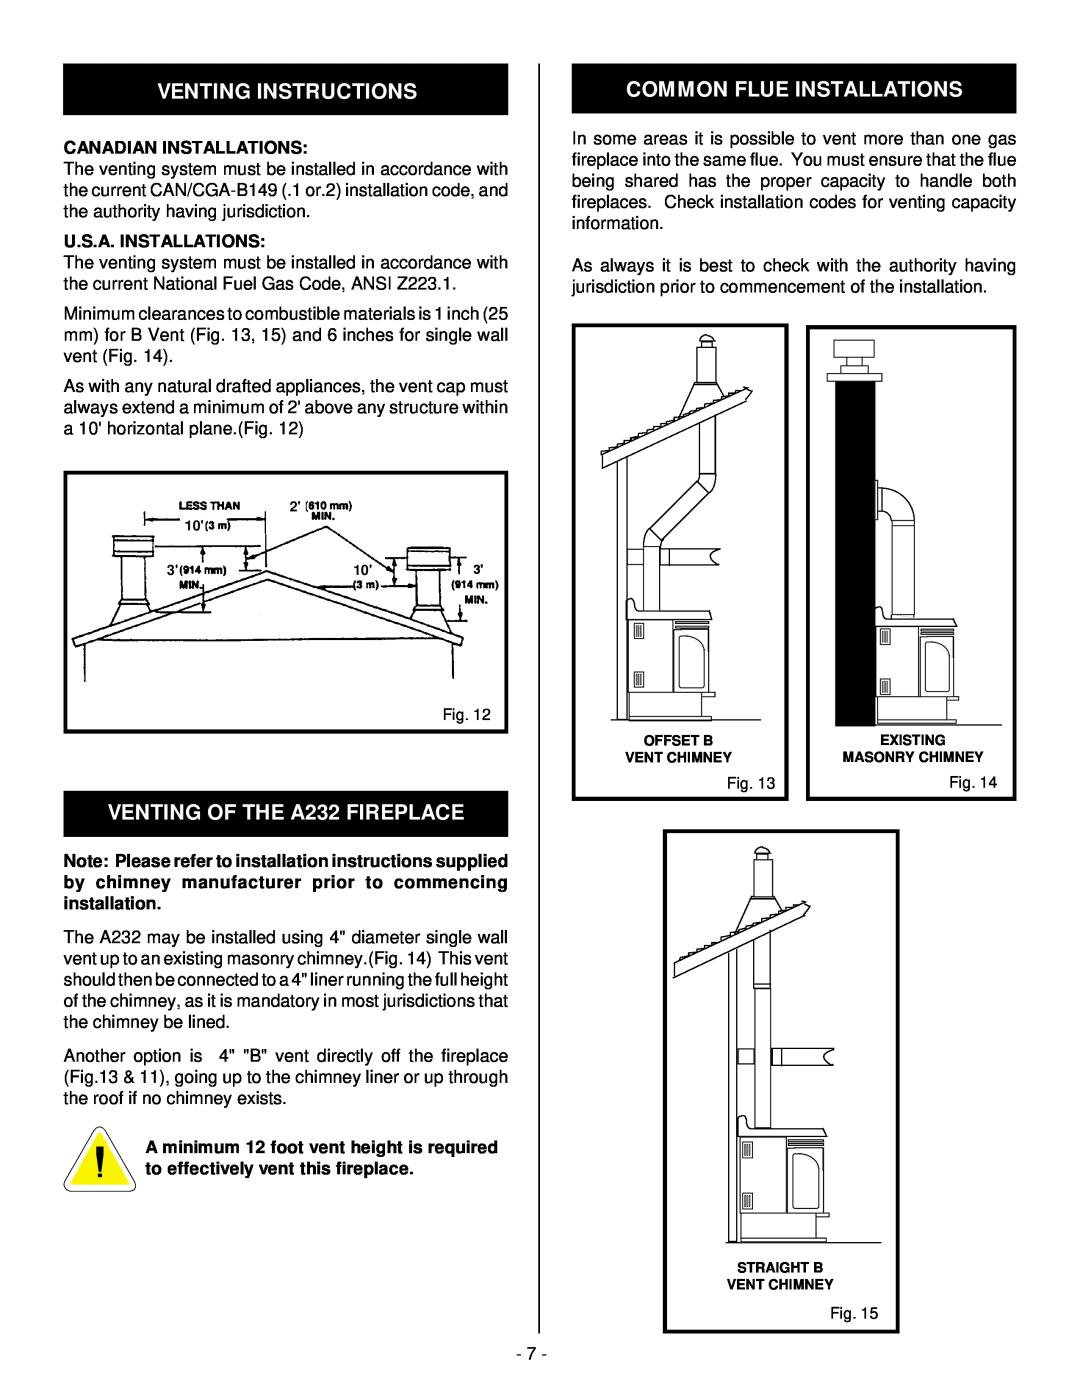 Vermont Casting Venting Instructions, VENTING OF THE A232 FIREPLACE, Common Flue Installations, Canadian Installations 